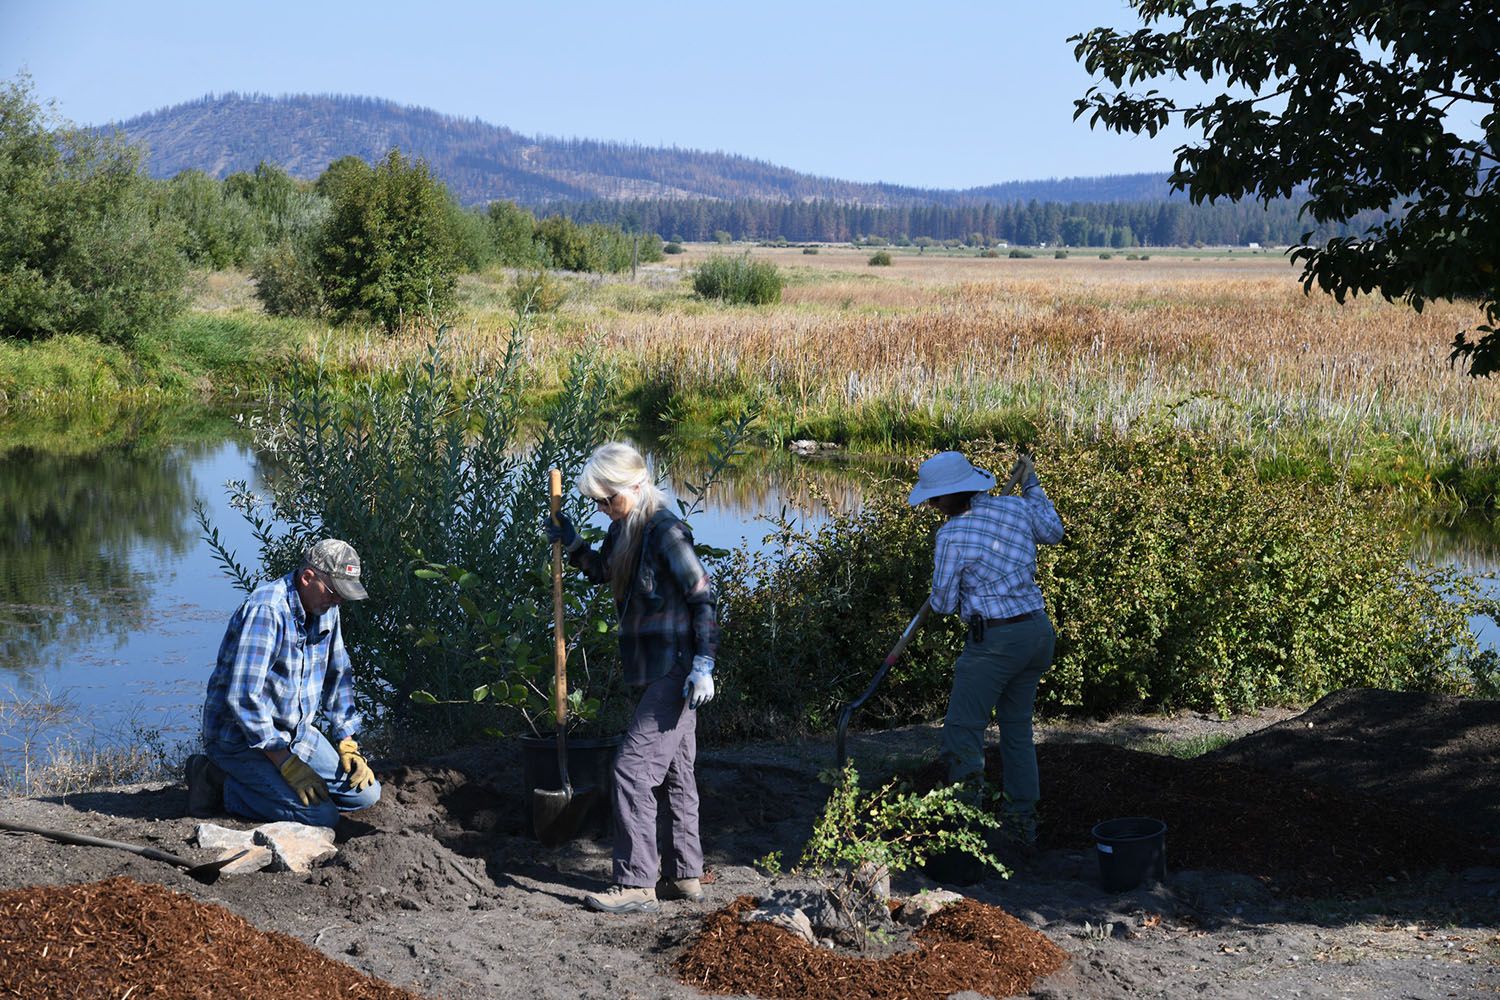 Foreground: three people digging and planting trees. Background: a wetland with trees and hills.